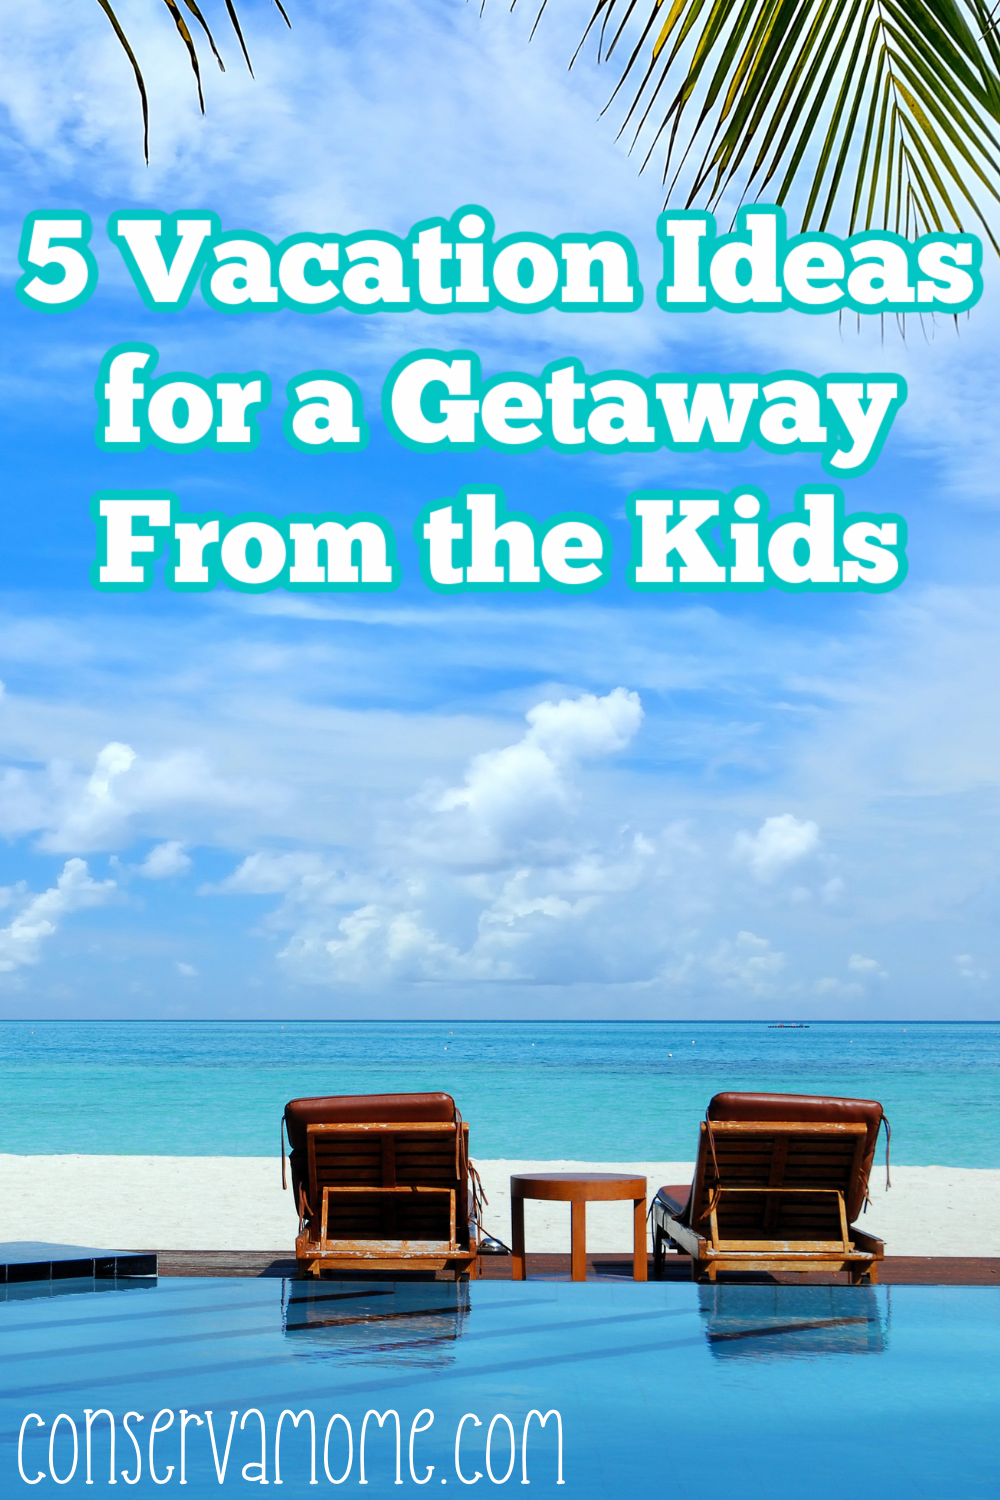 5 Vacation Ideas for a Getaway from the kids